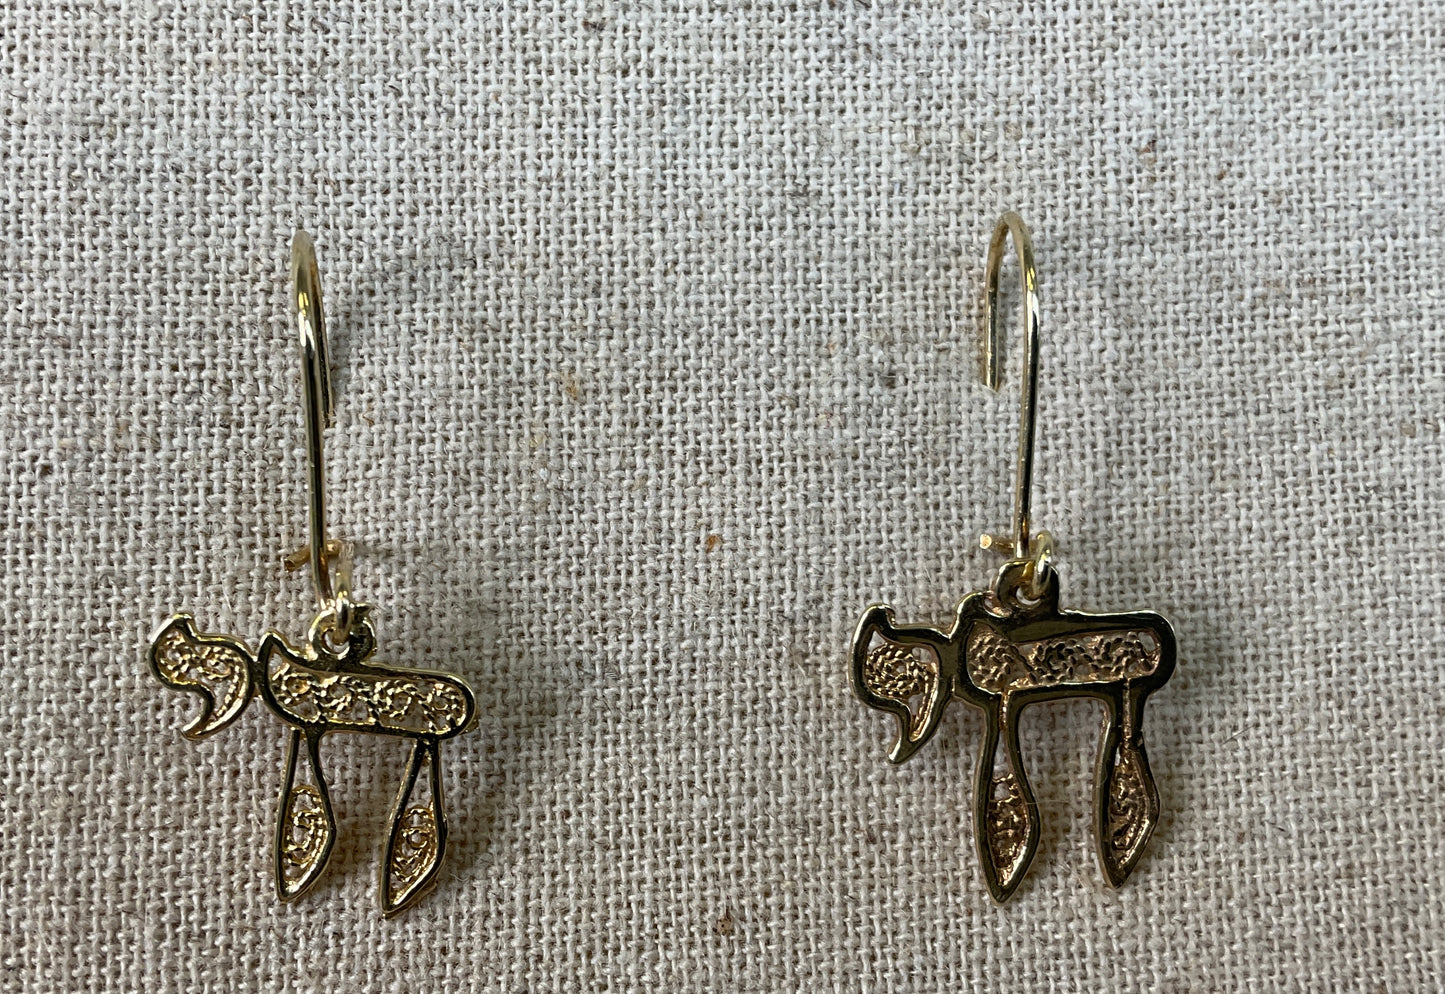 Gold Tone Costume Earrings, Sold Separately